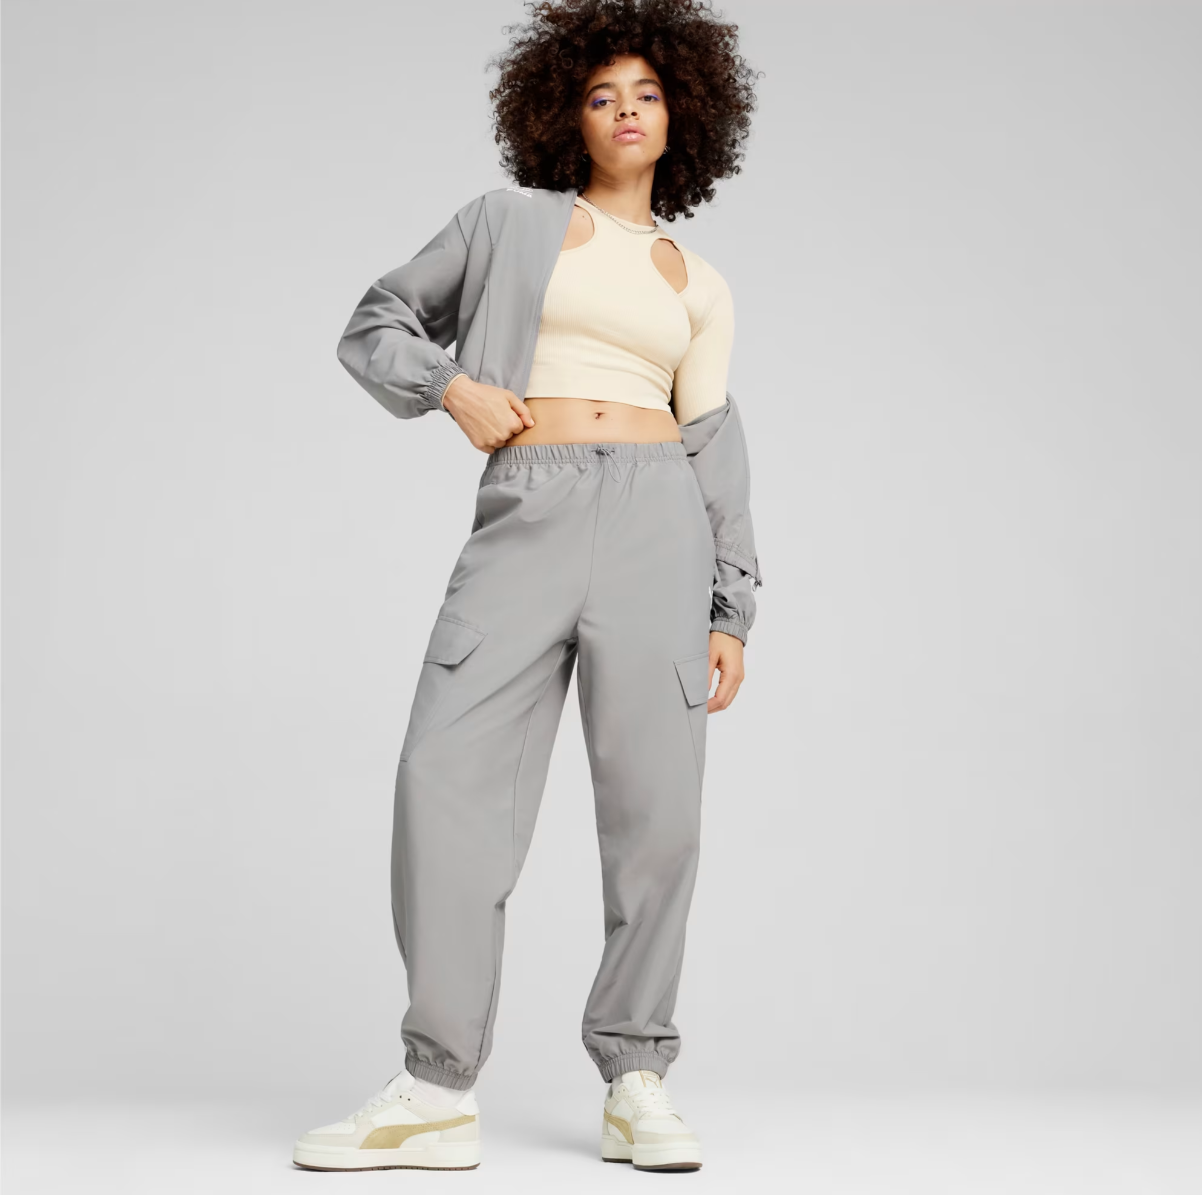 DARE TO Women's Relaxed Woven Pants